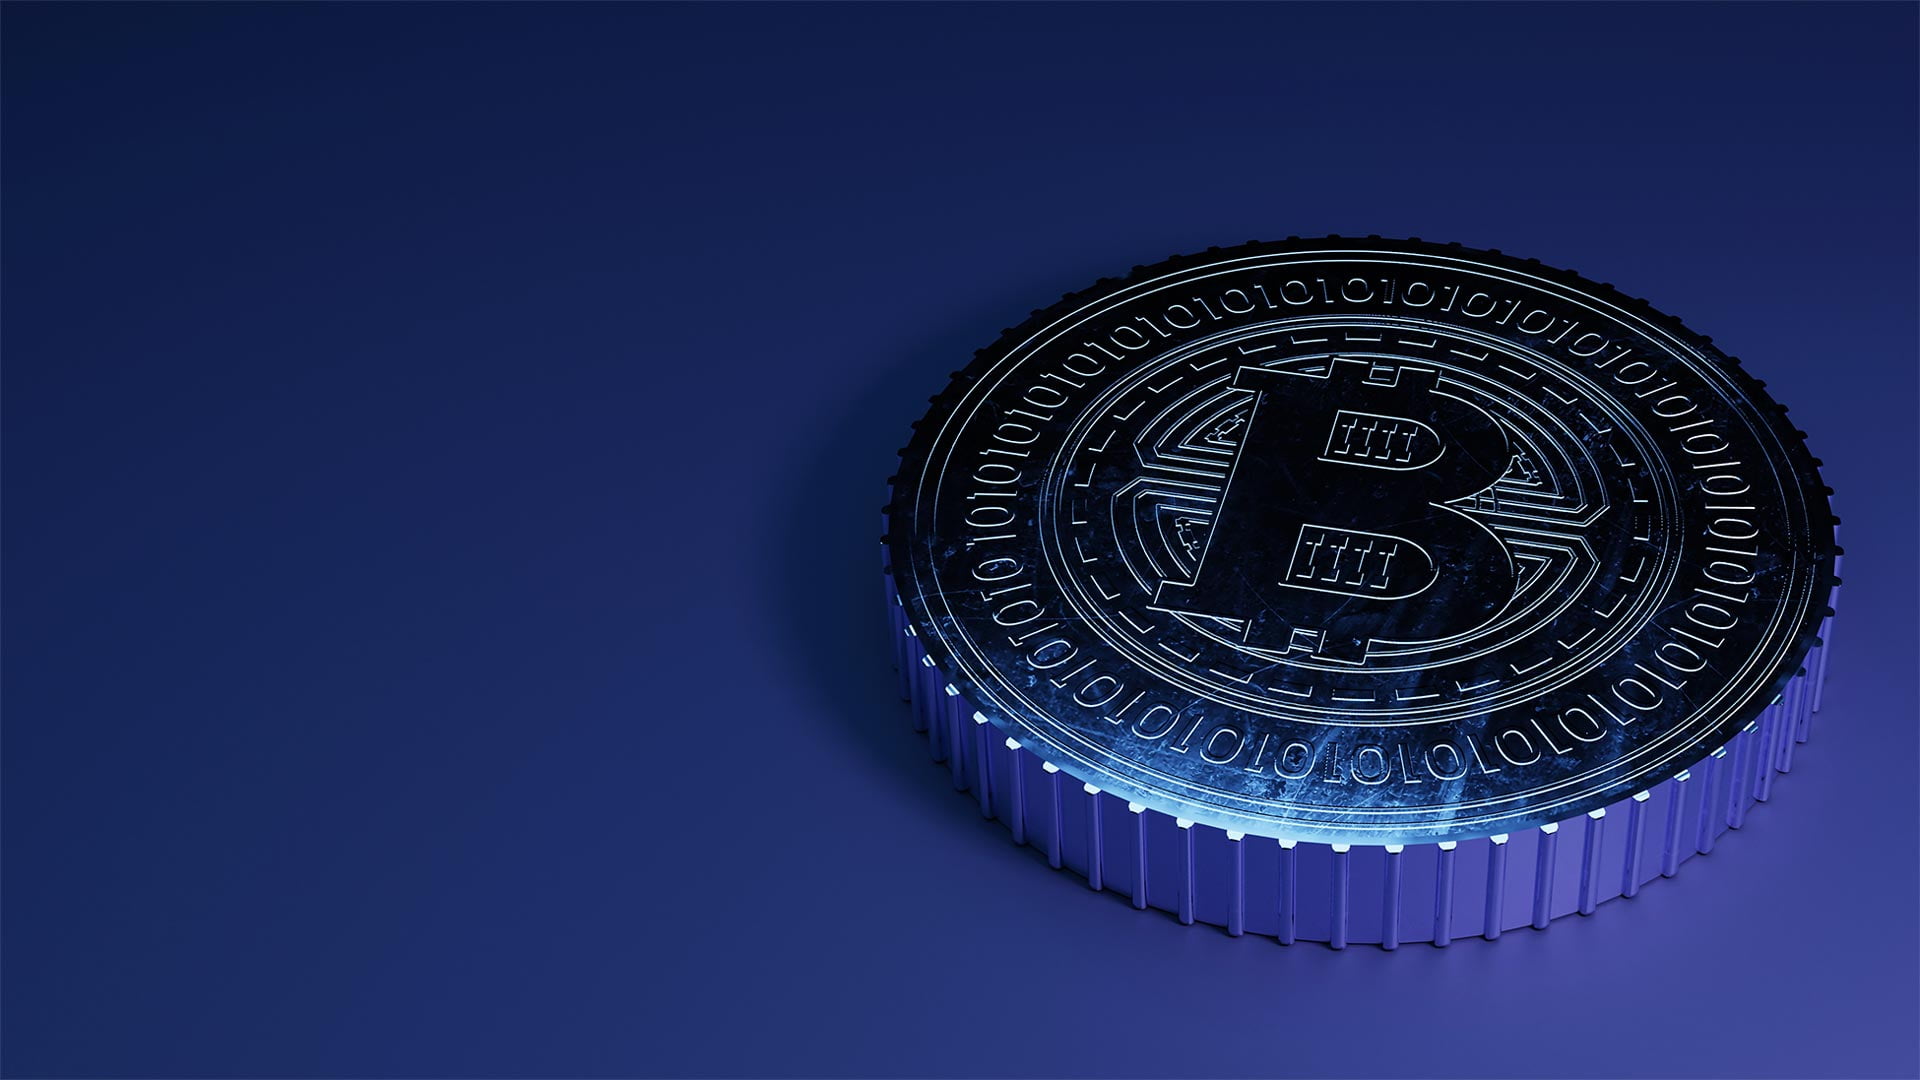 TOP 15 BITCOIN MINING STATS AND MARKET TRENDS IN 2022